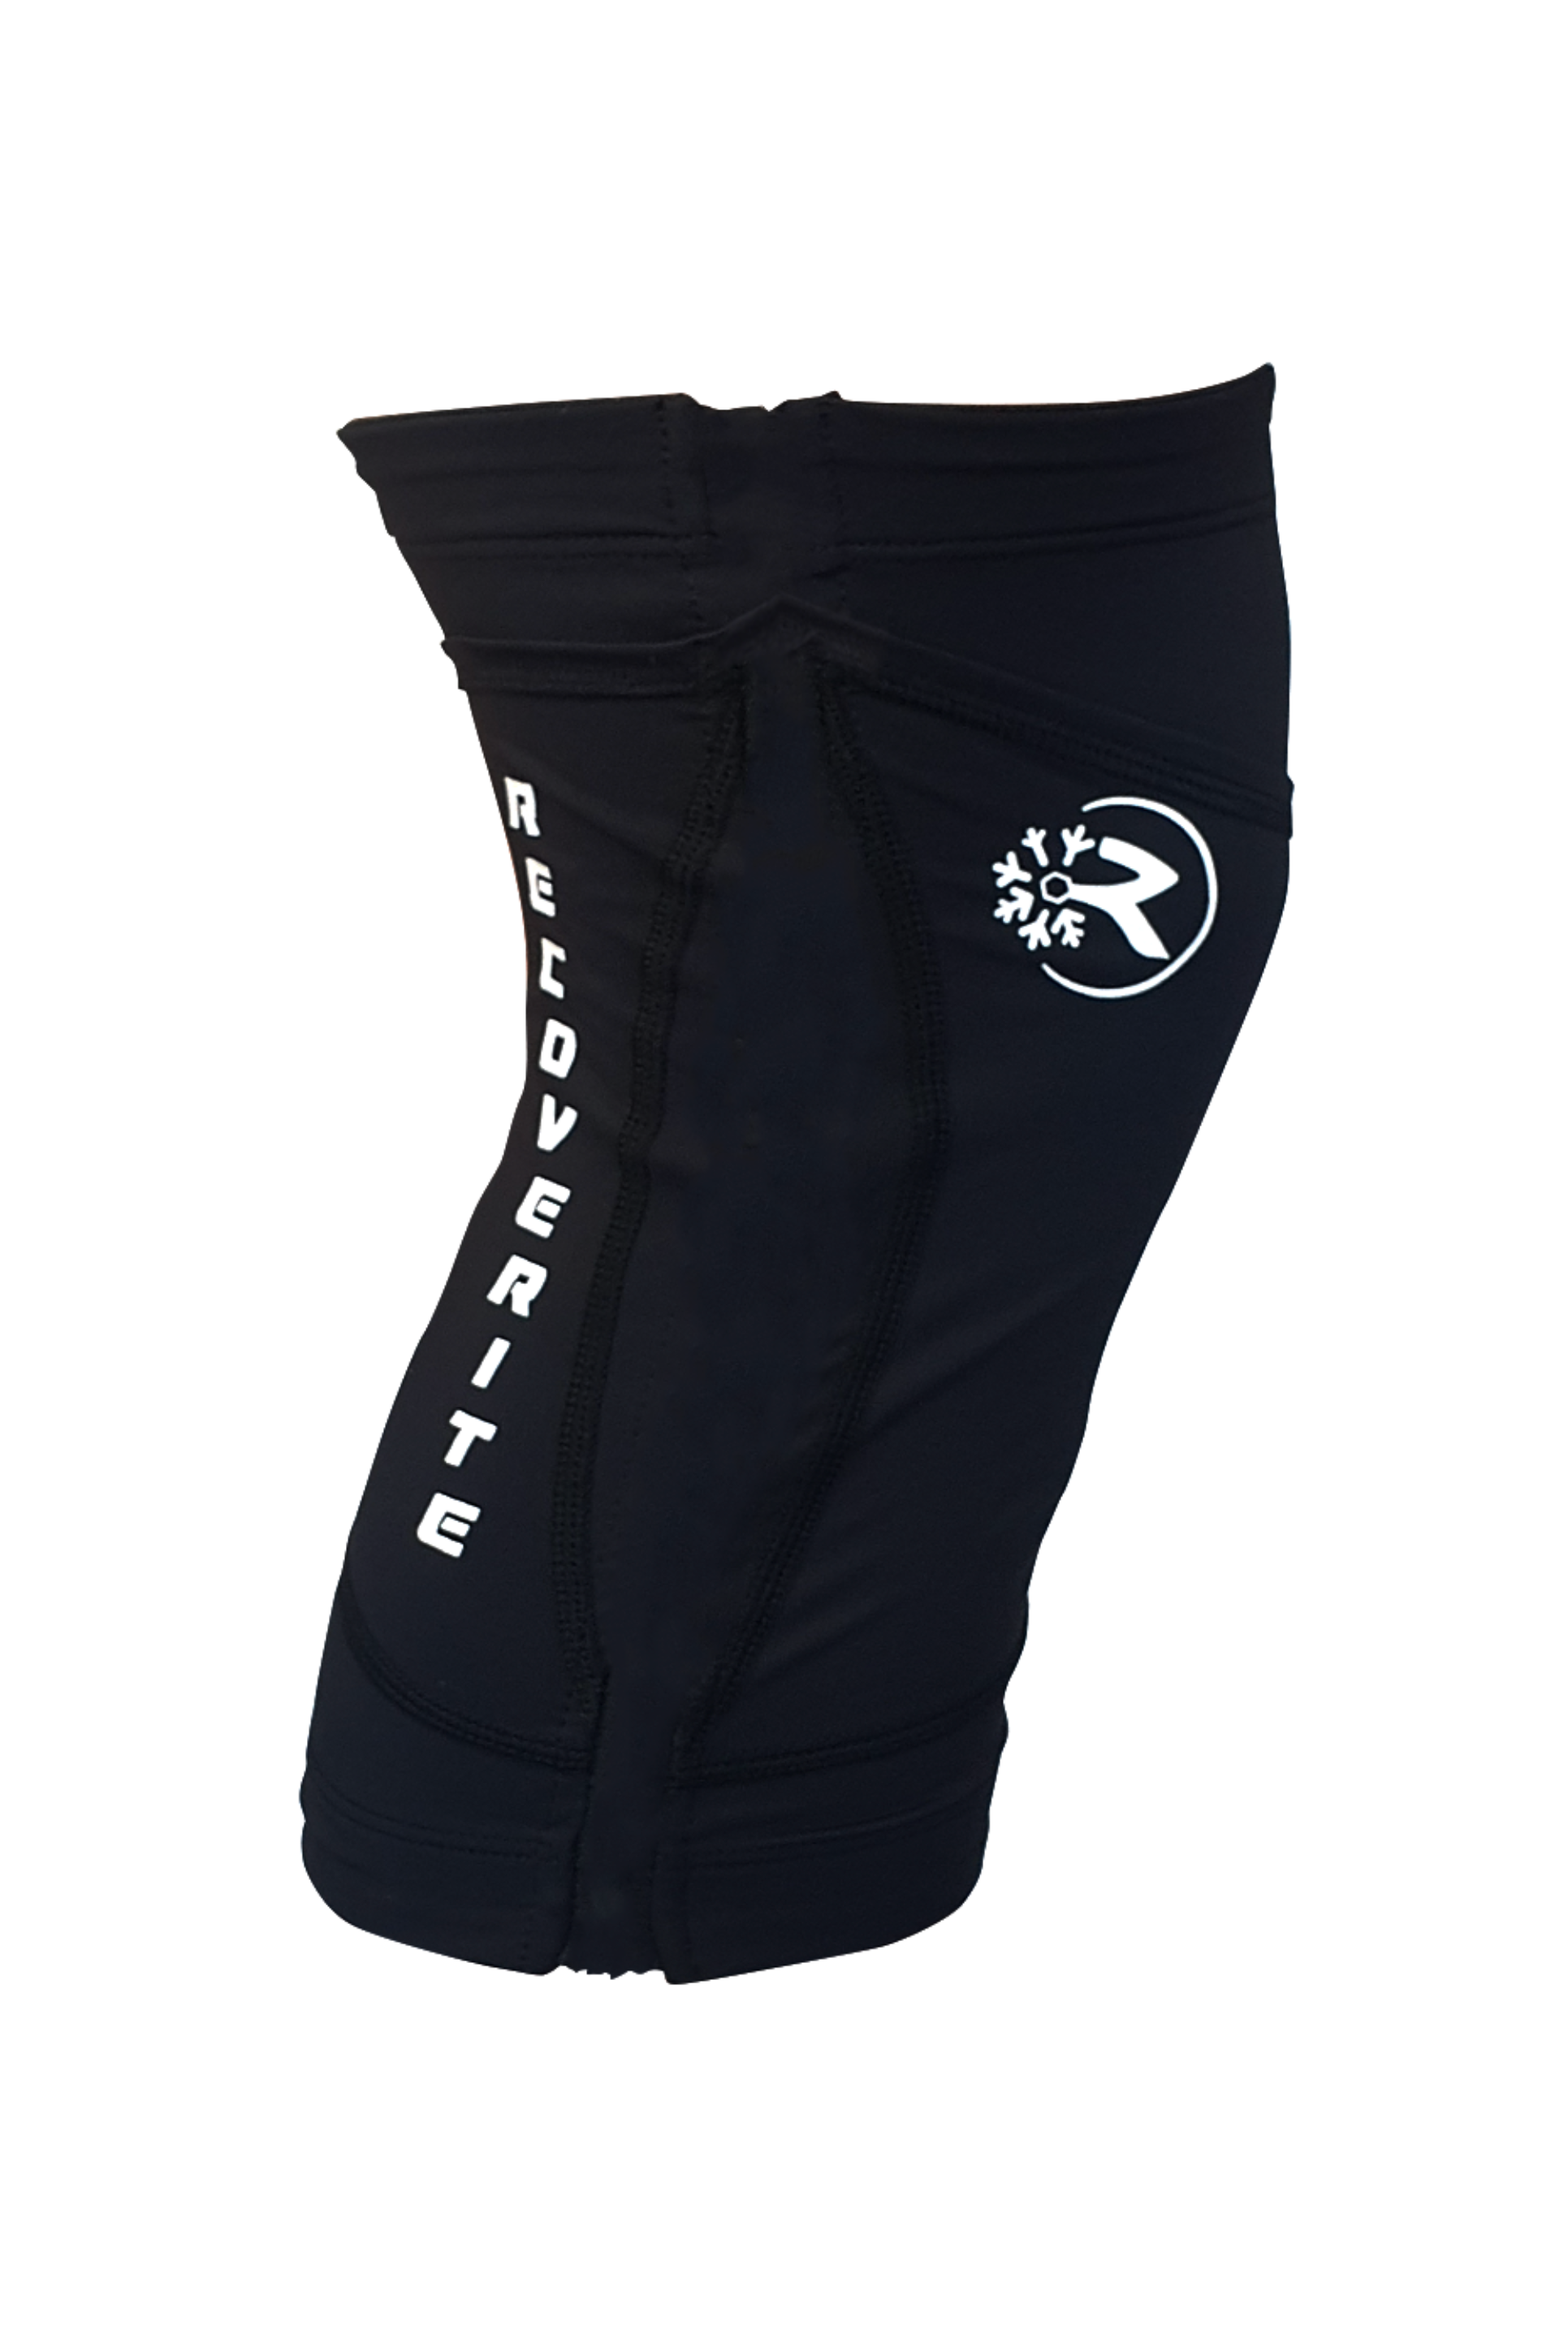 Knee Compression Sleeves with Ice/Heat Packs by Recoverite Compression